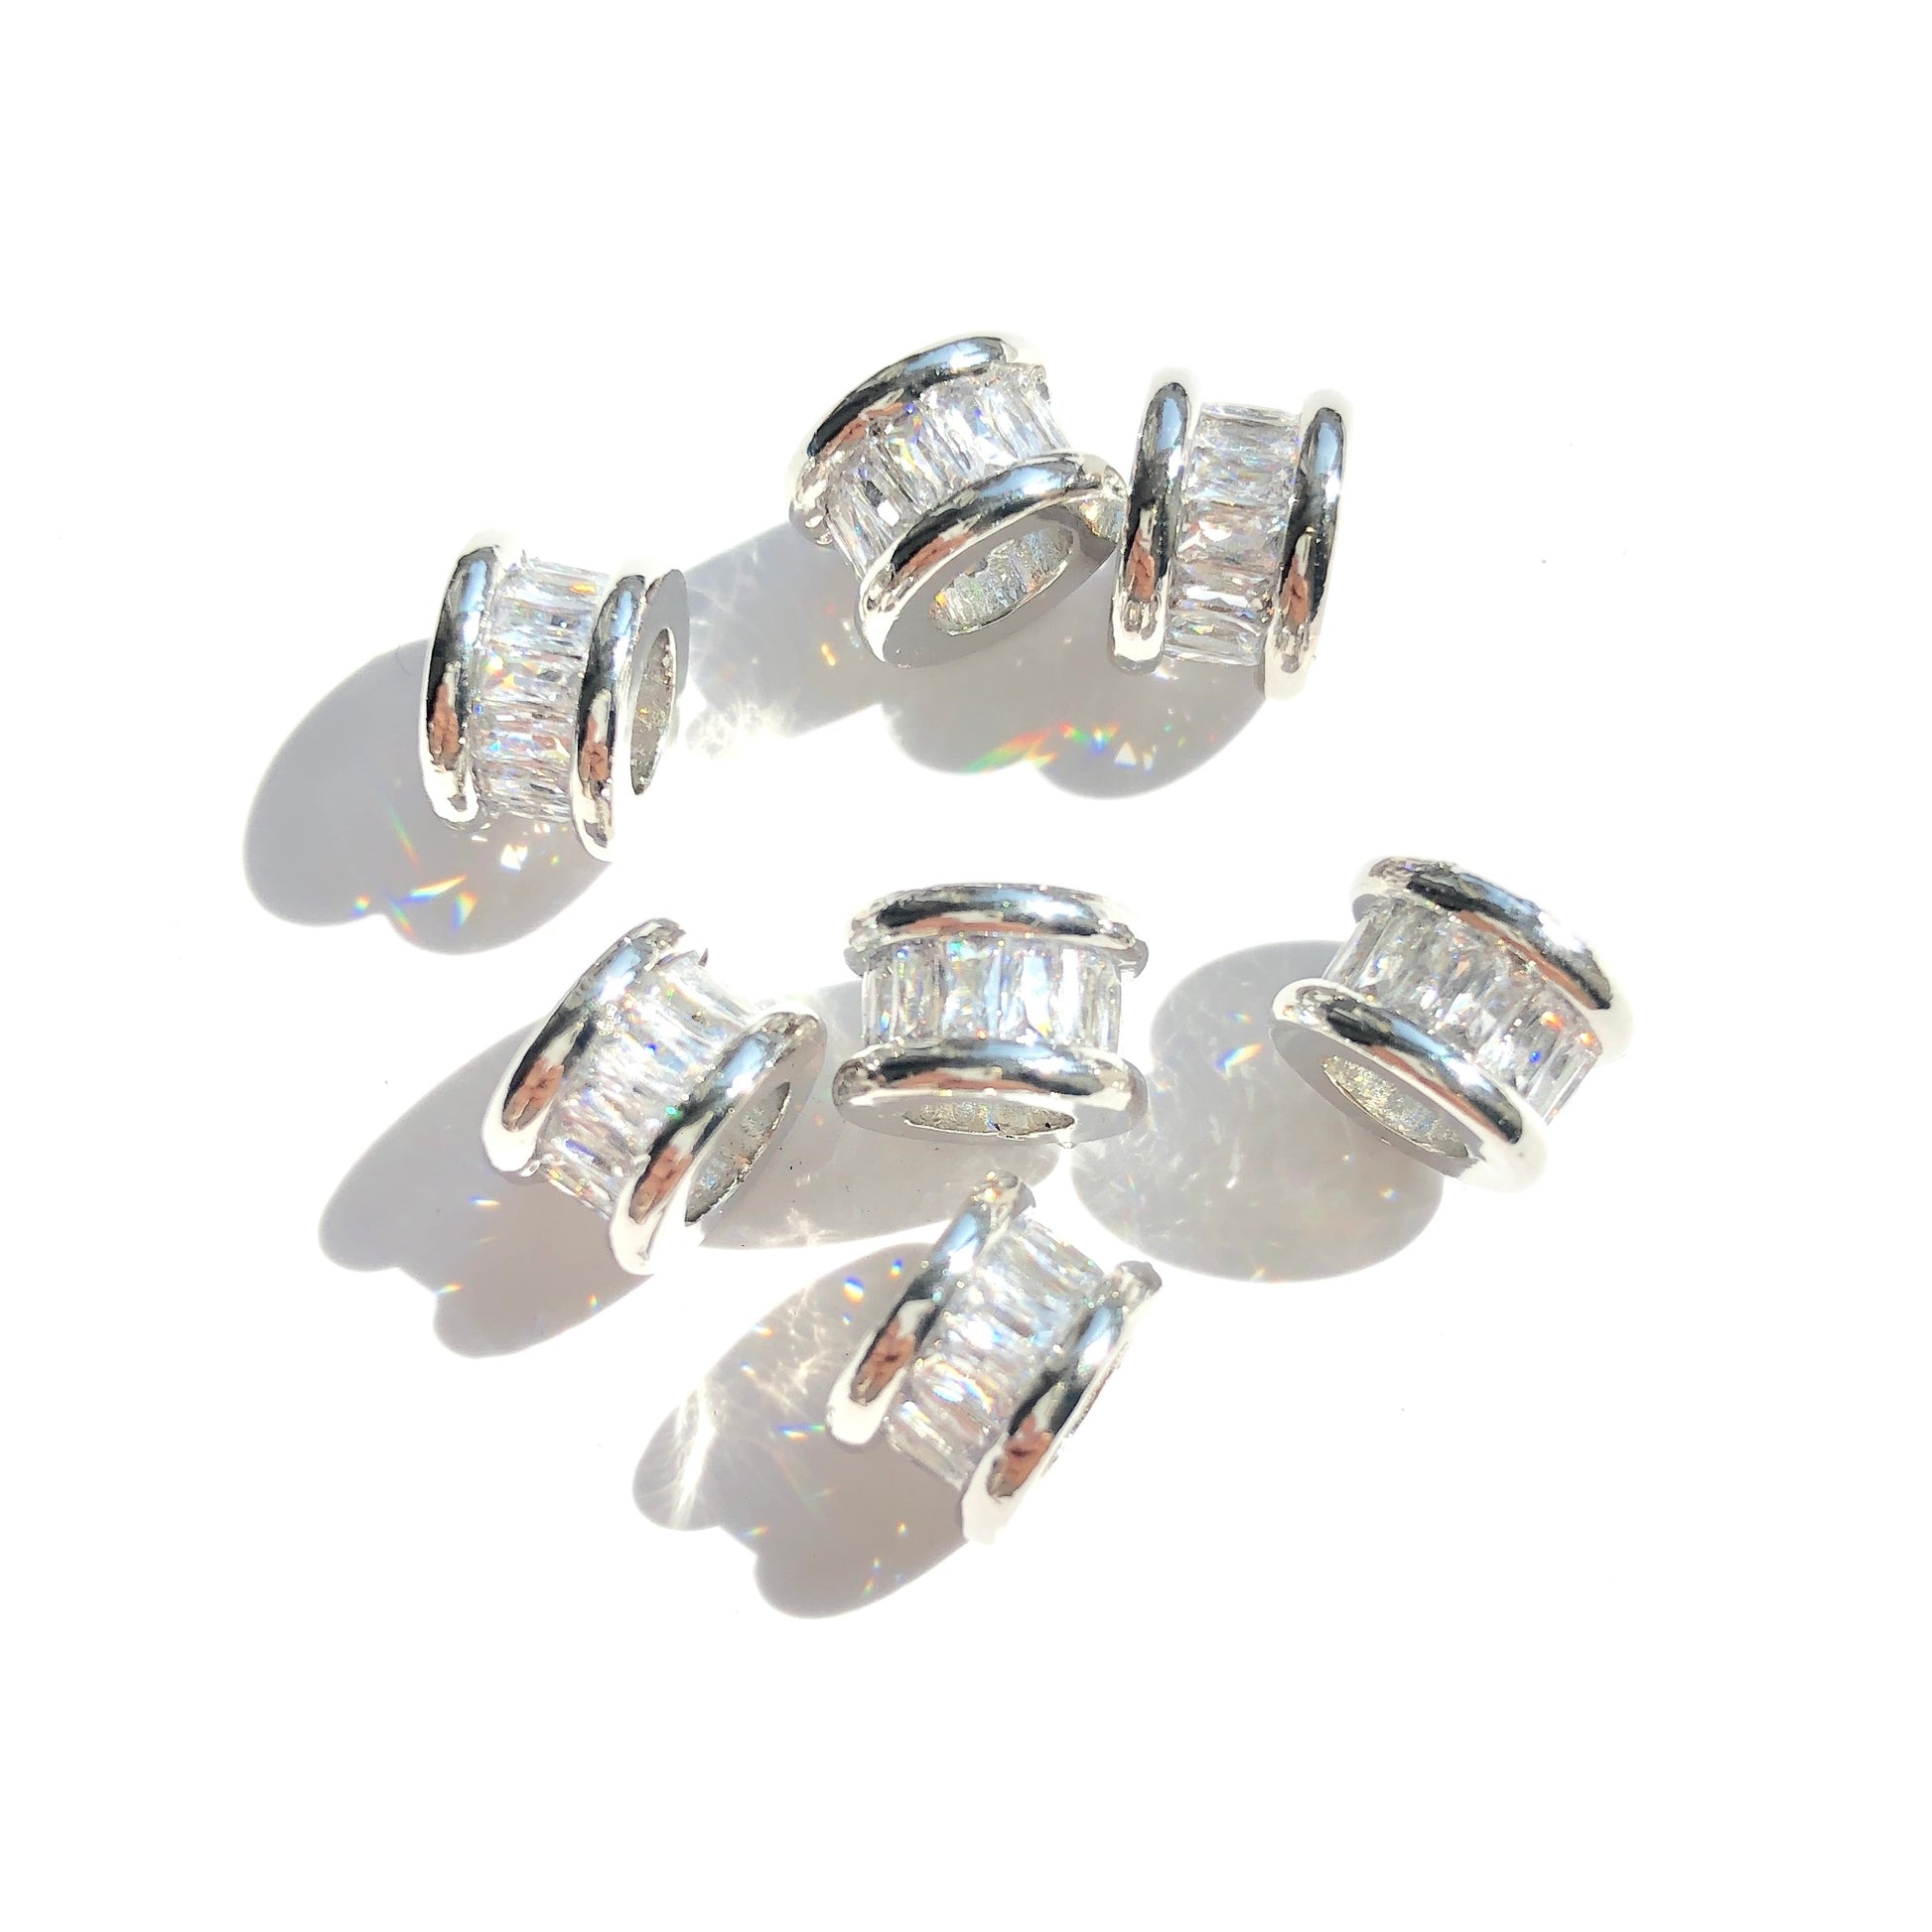 10pcs/lot 9*6mm CZ Paved Big Hole Wheel Spacers Silver CZ Paved Spacers Big Hole Beads New Spacers Arrivals Charms Beads Beyond